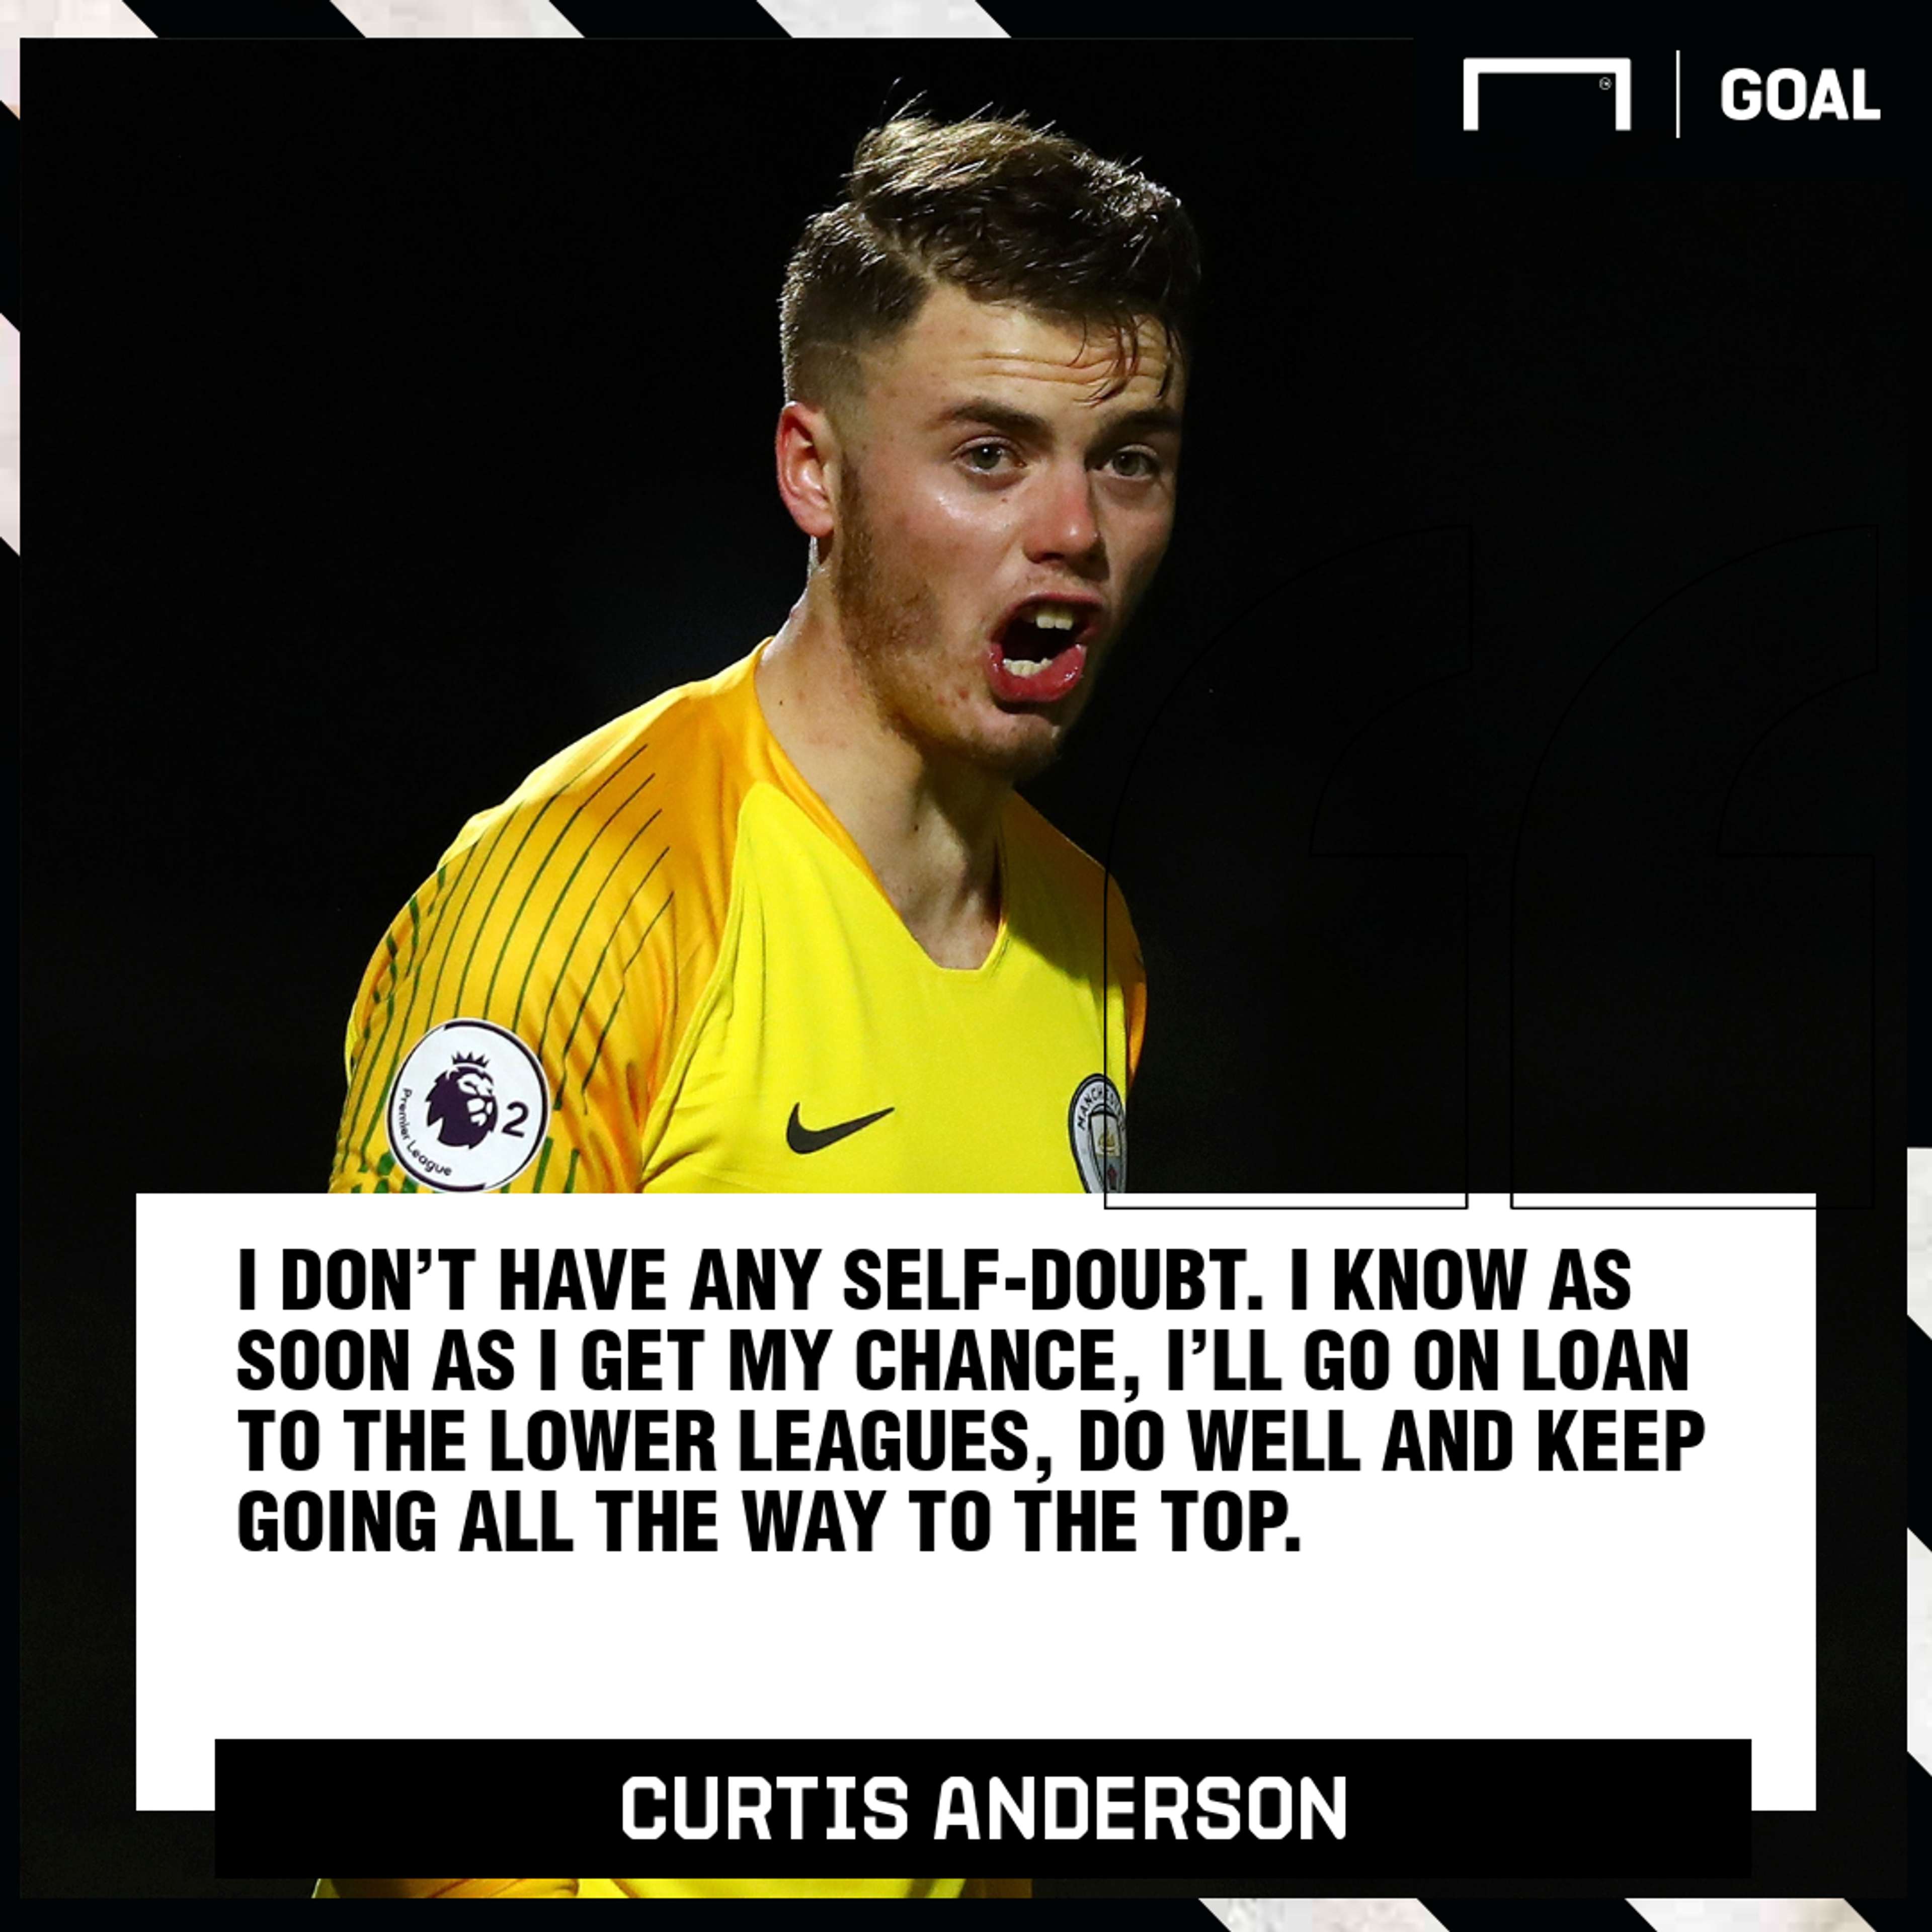 Curtis Anderson PS